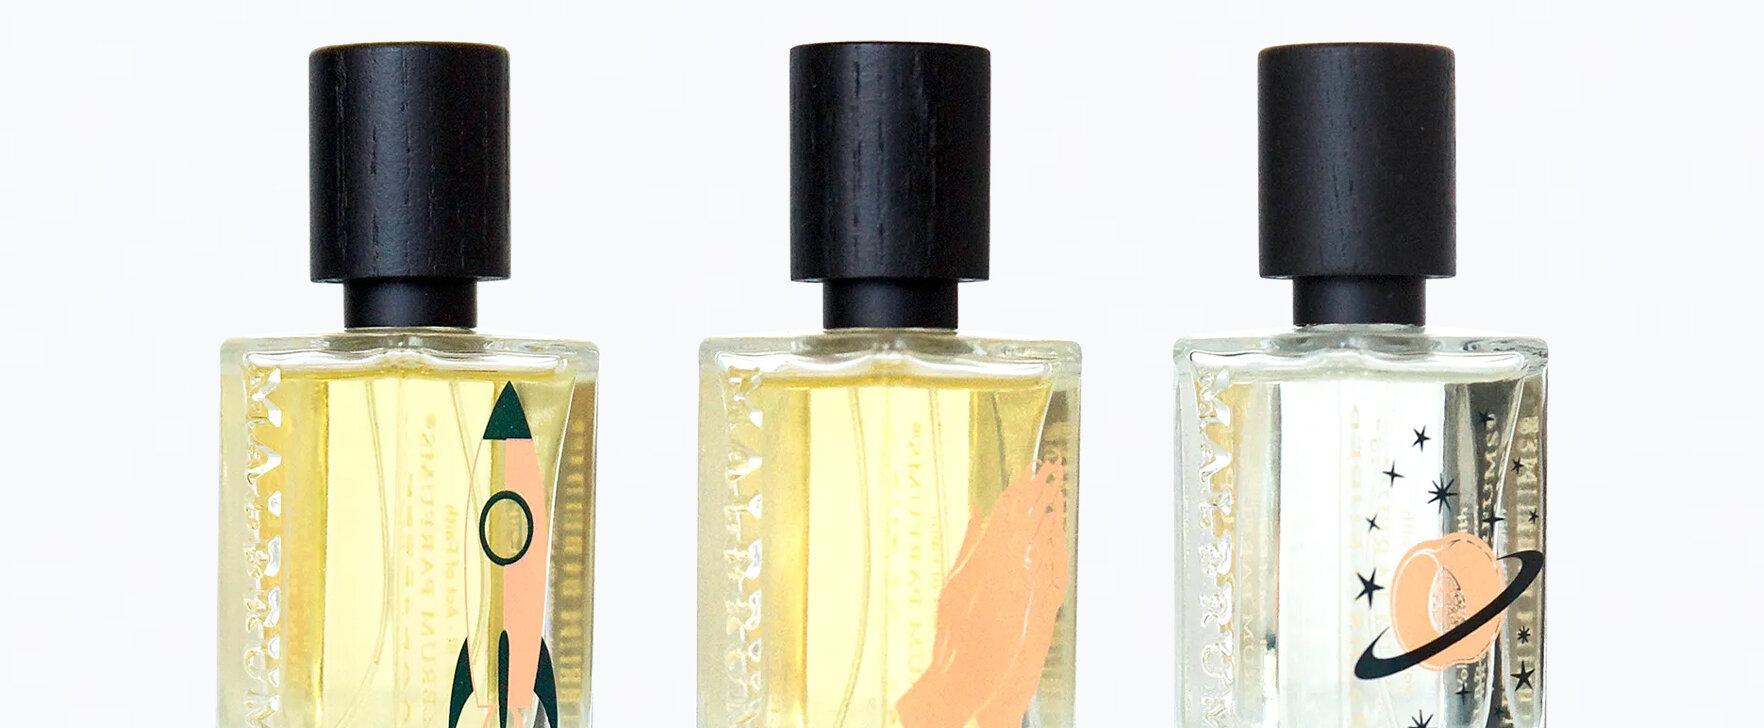 New Trio of Fragrances From Malbrum: The "Volume III - Act of Faith" Collection